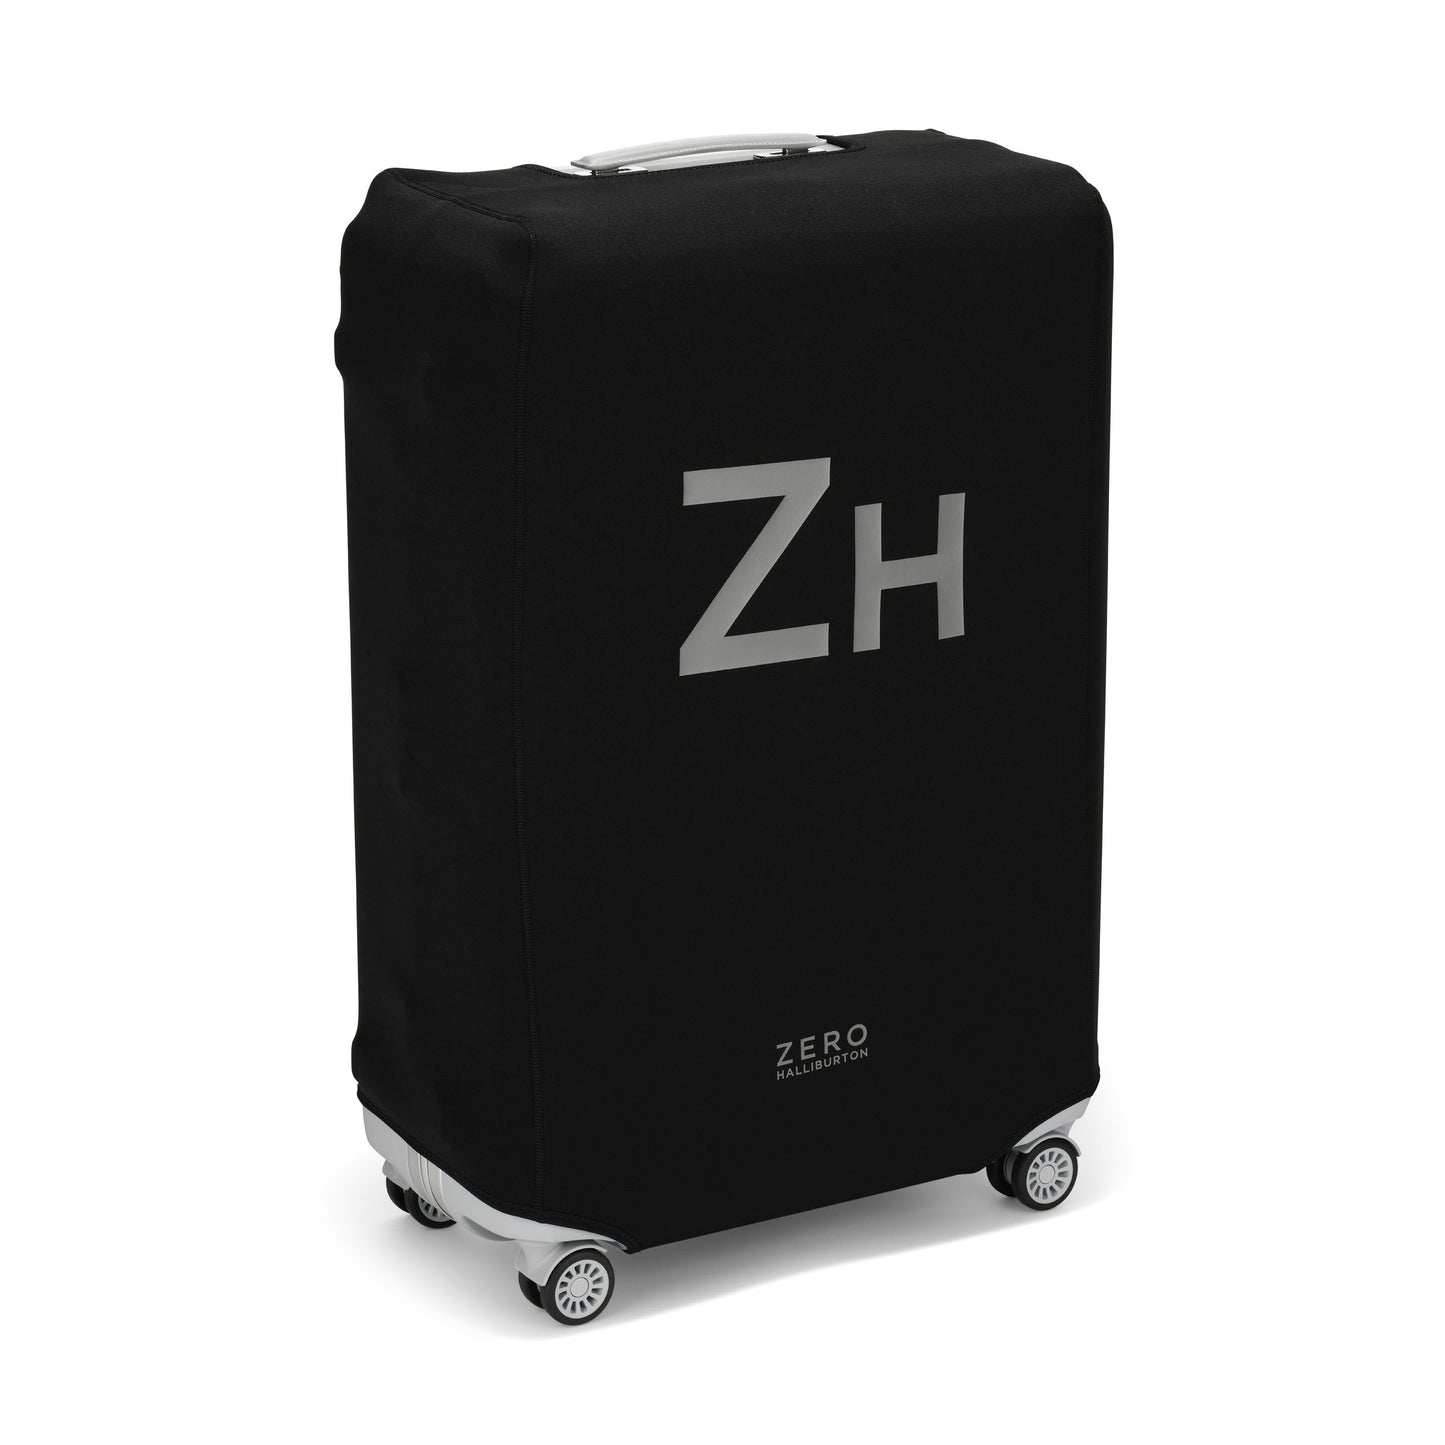 Accessories | Gen ZH Luggage Cover 30"